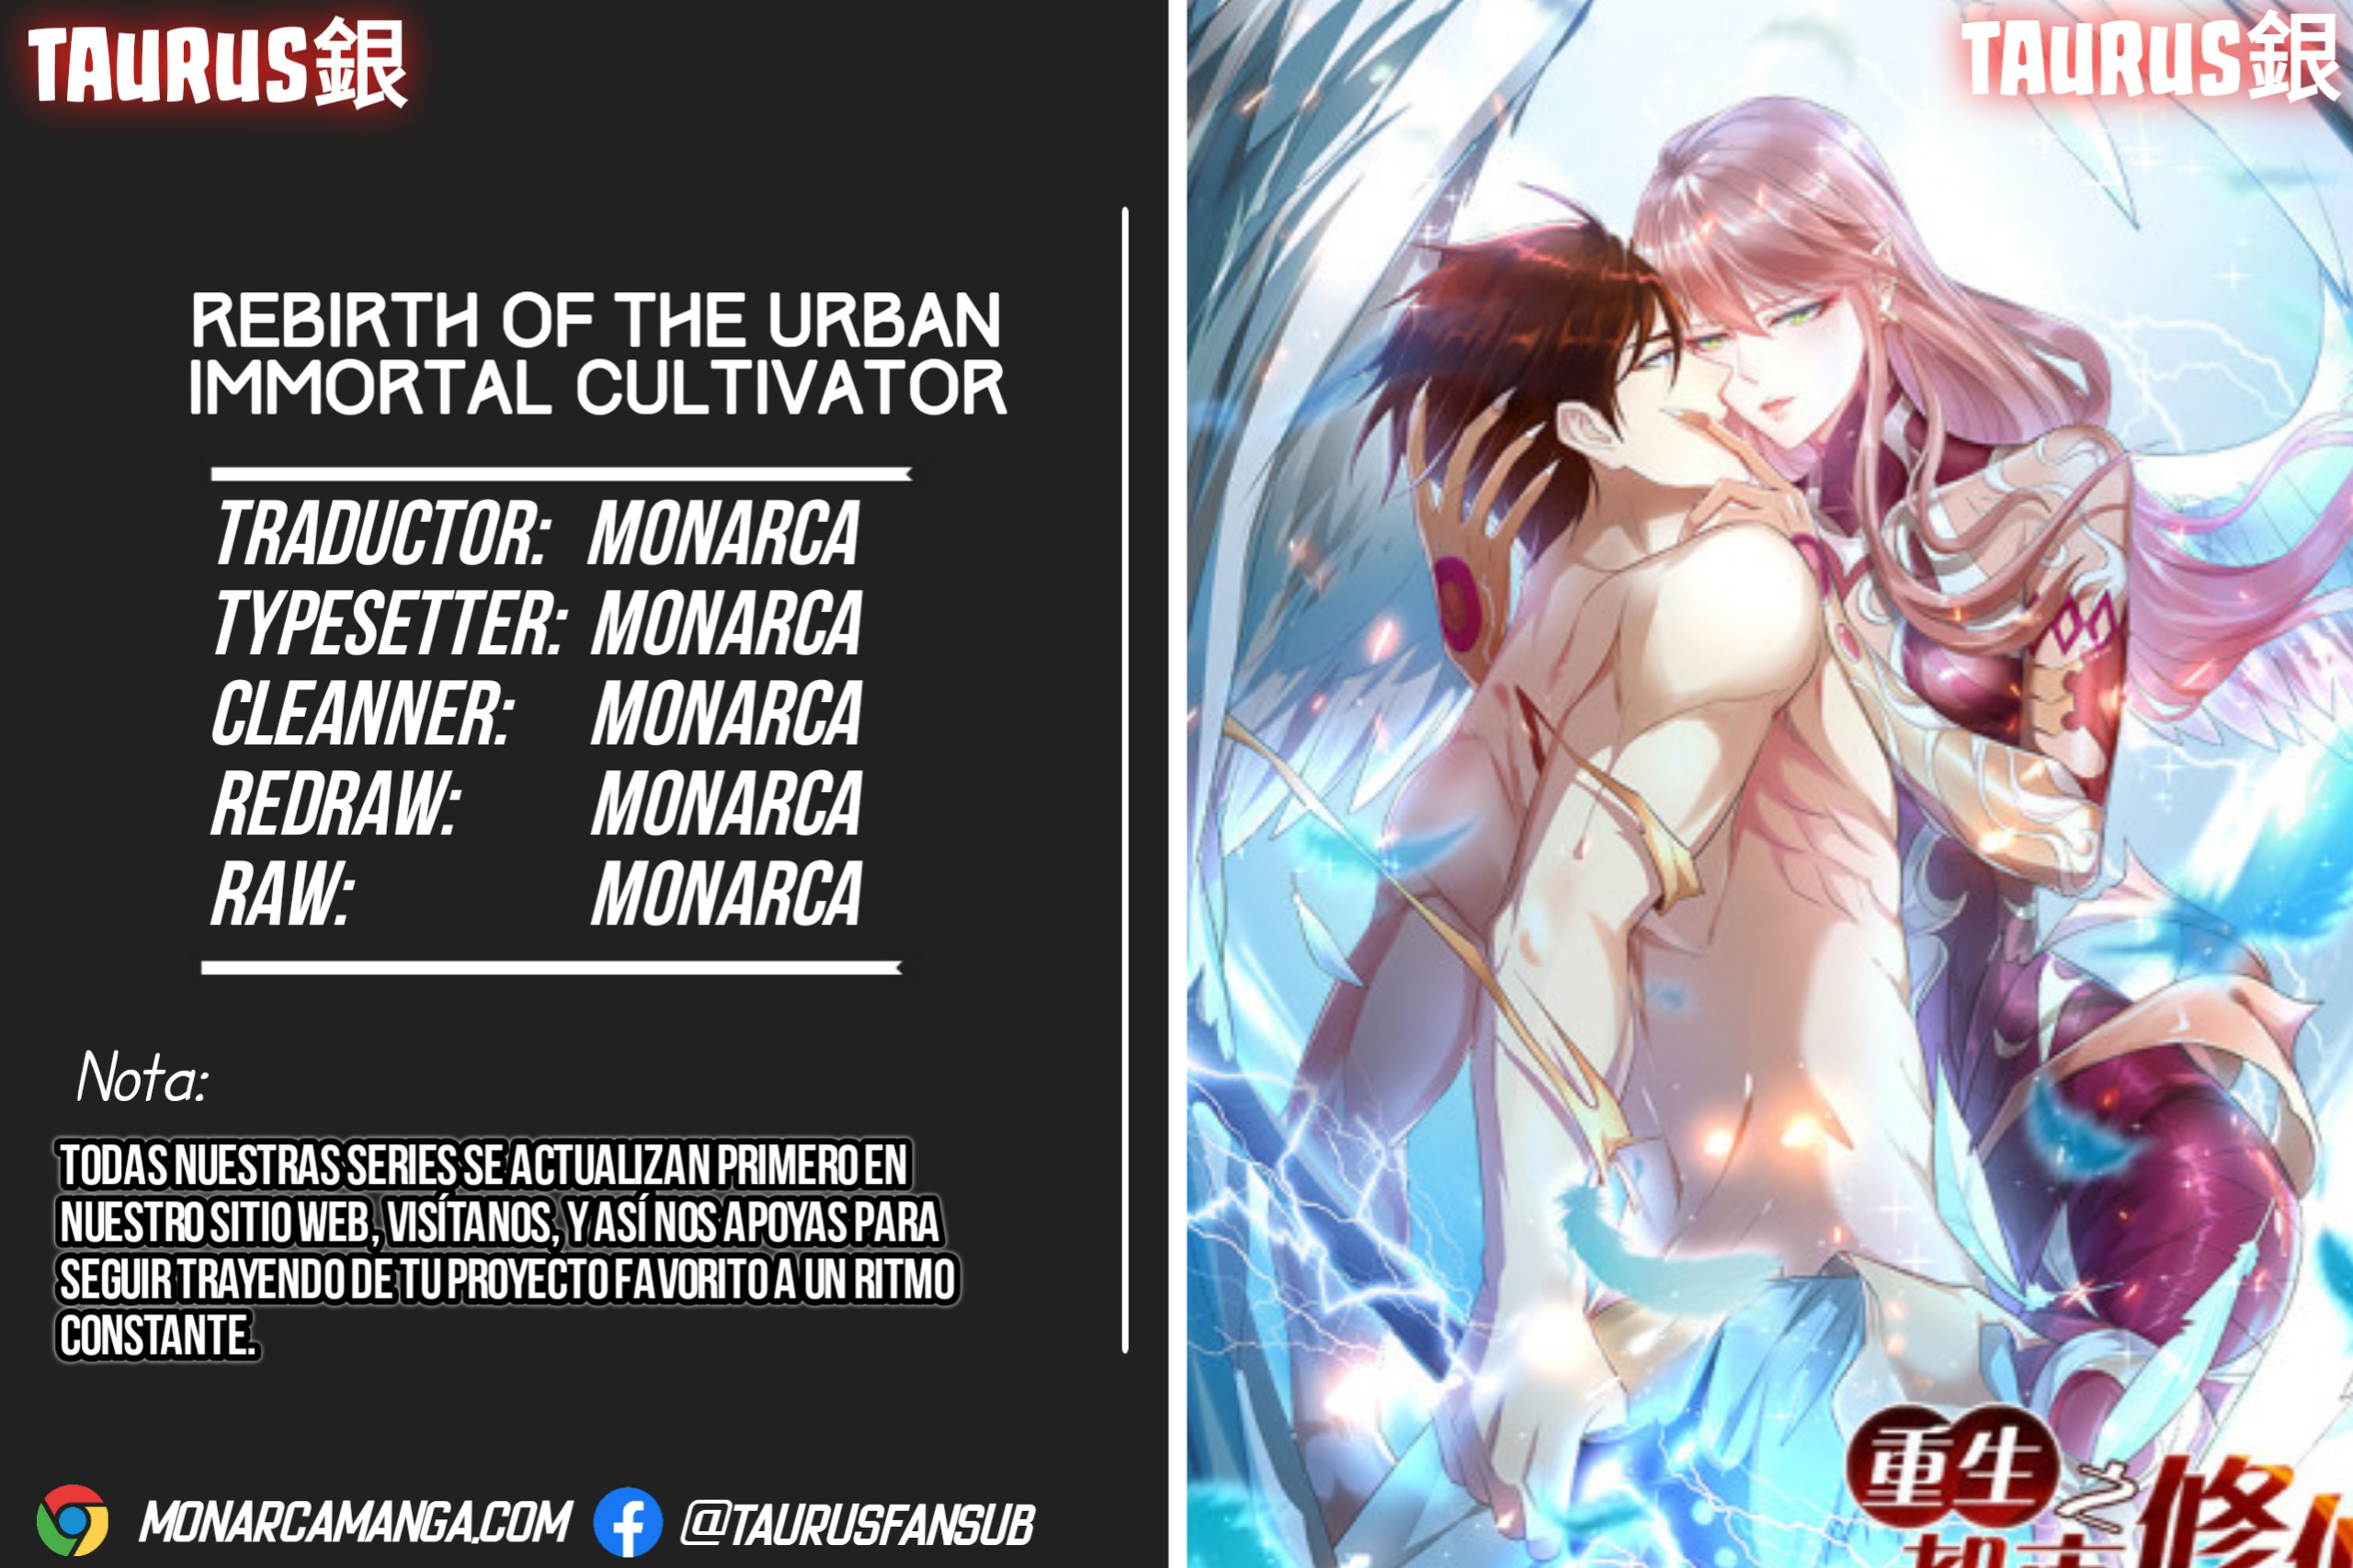 Manga Rebirth Of The Urban Immortal Cultivator Chapter 800 image number 13